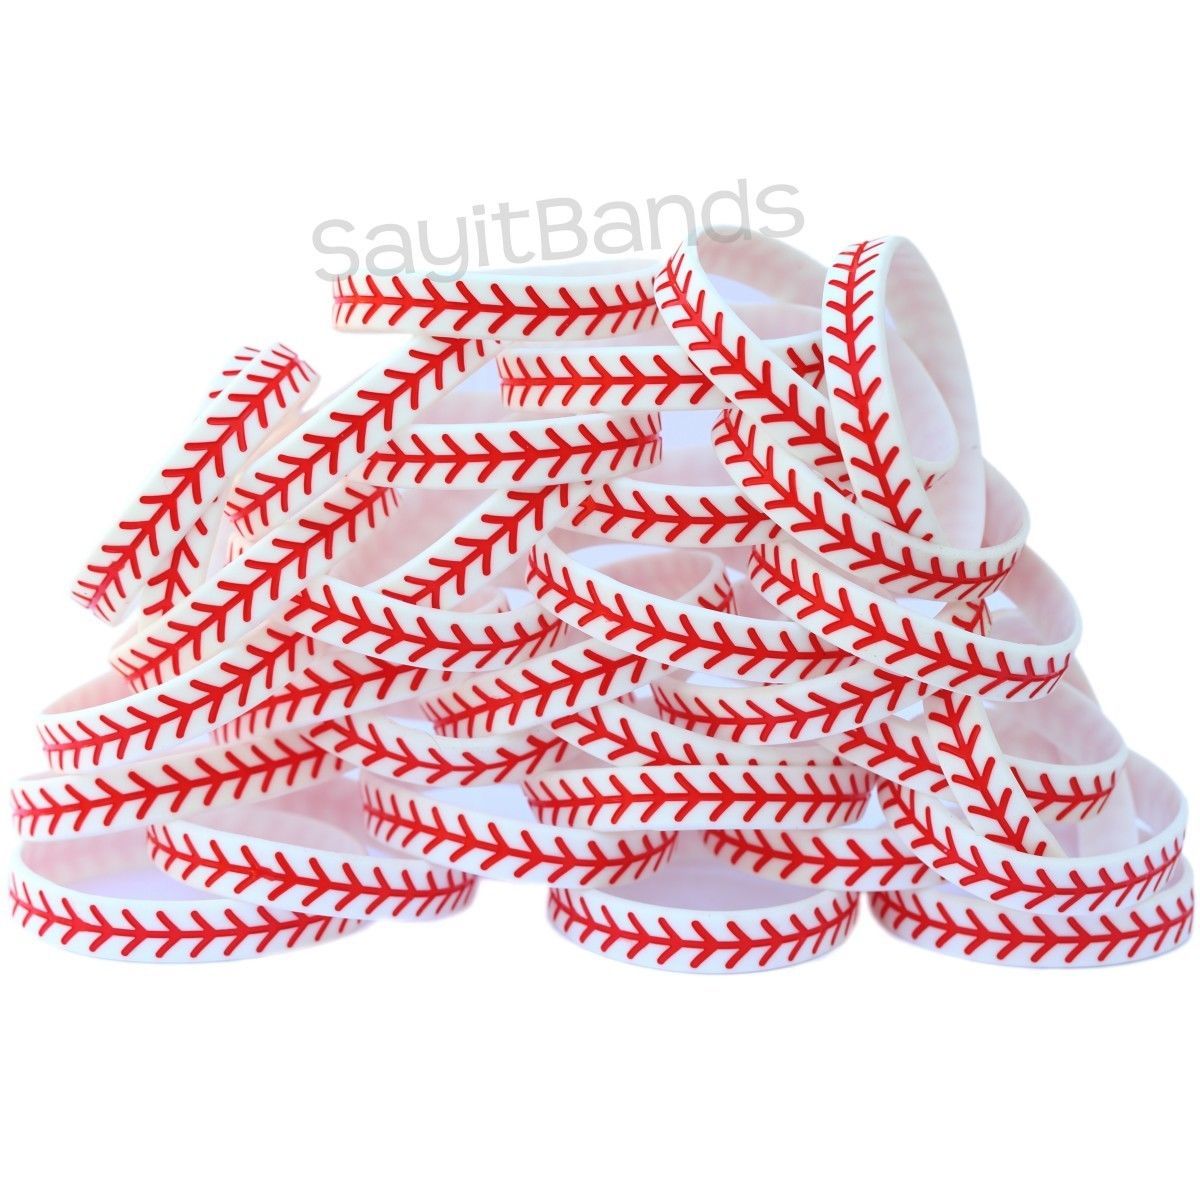 100 Wristbands with BASEBALL Design Debossed Color Filled Thread Pattern Bands - $58.29